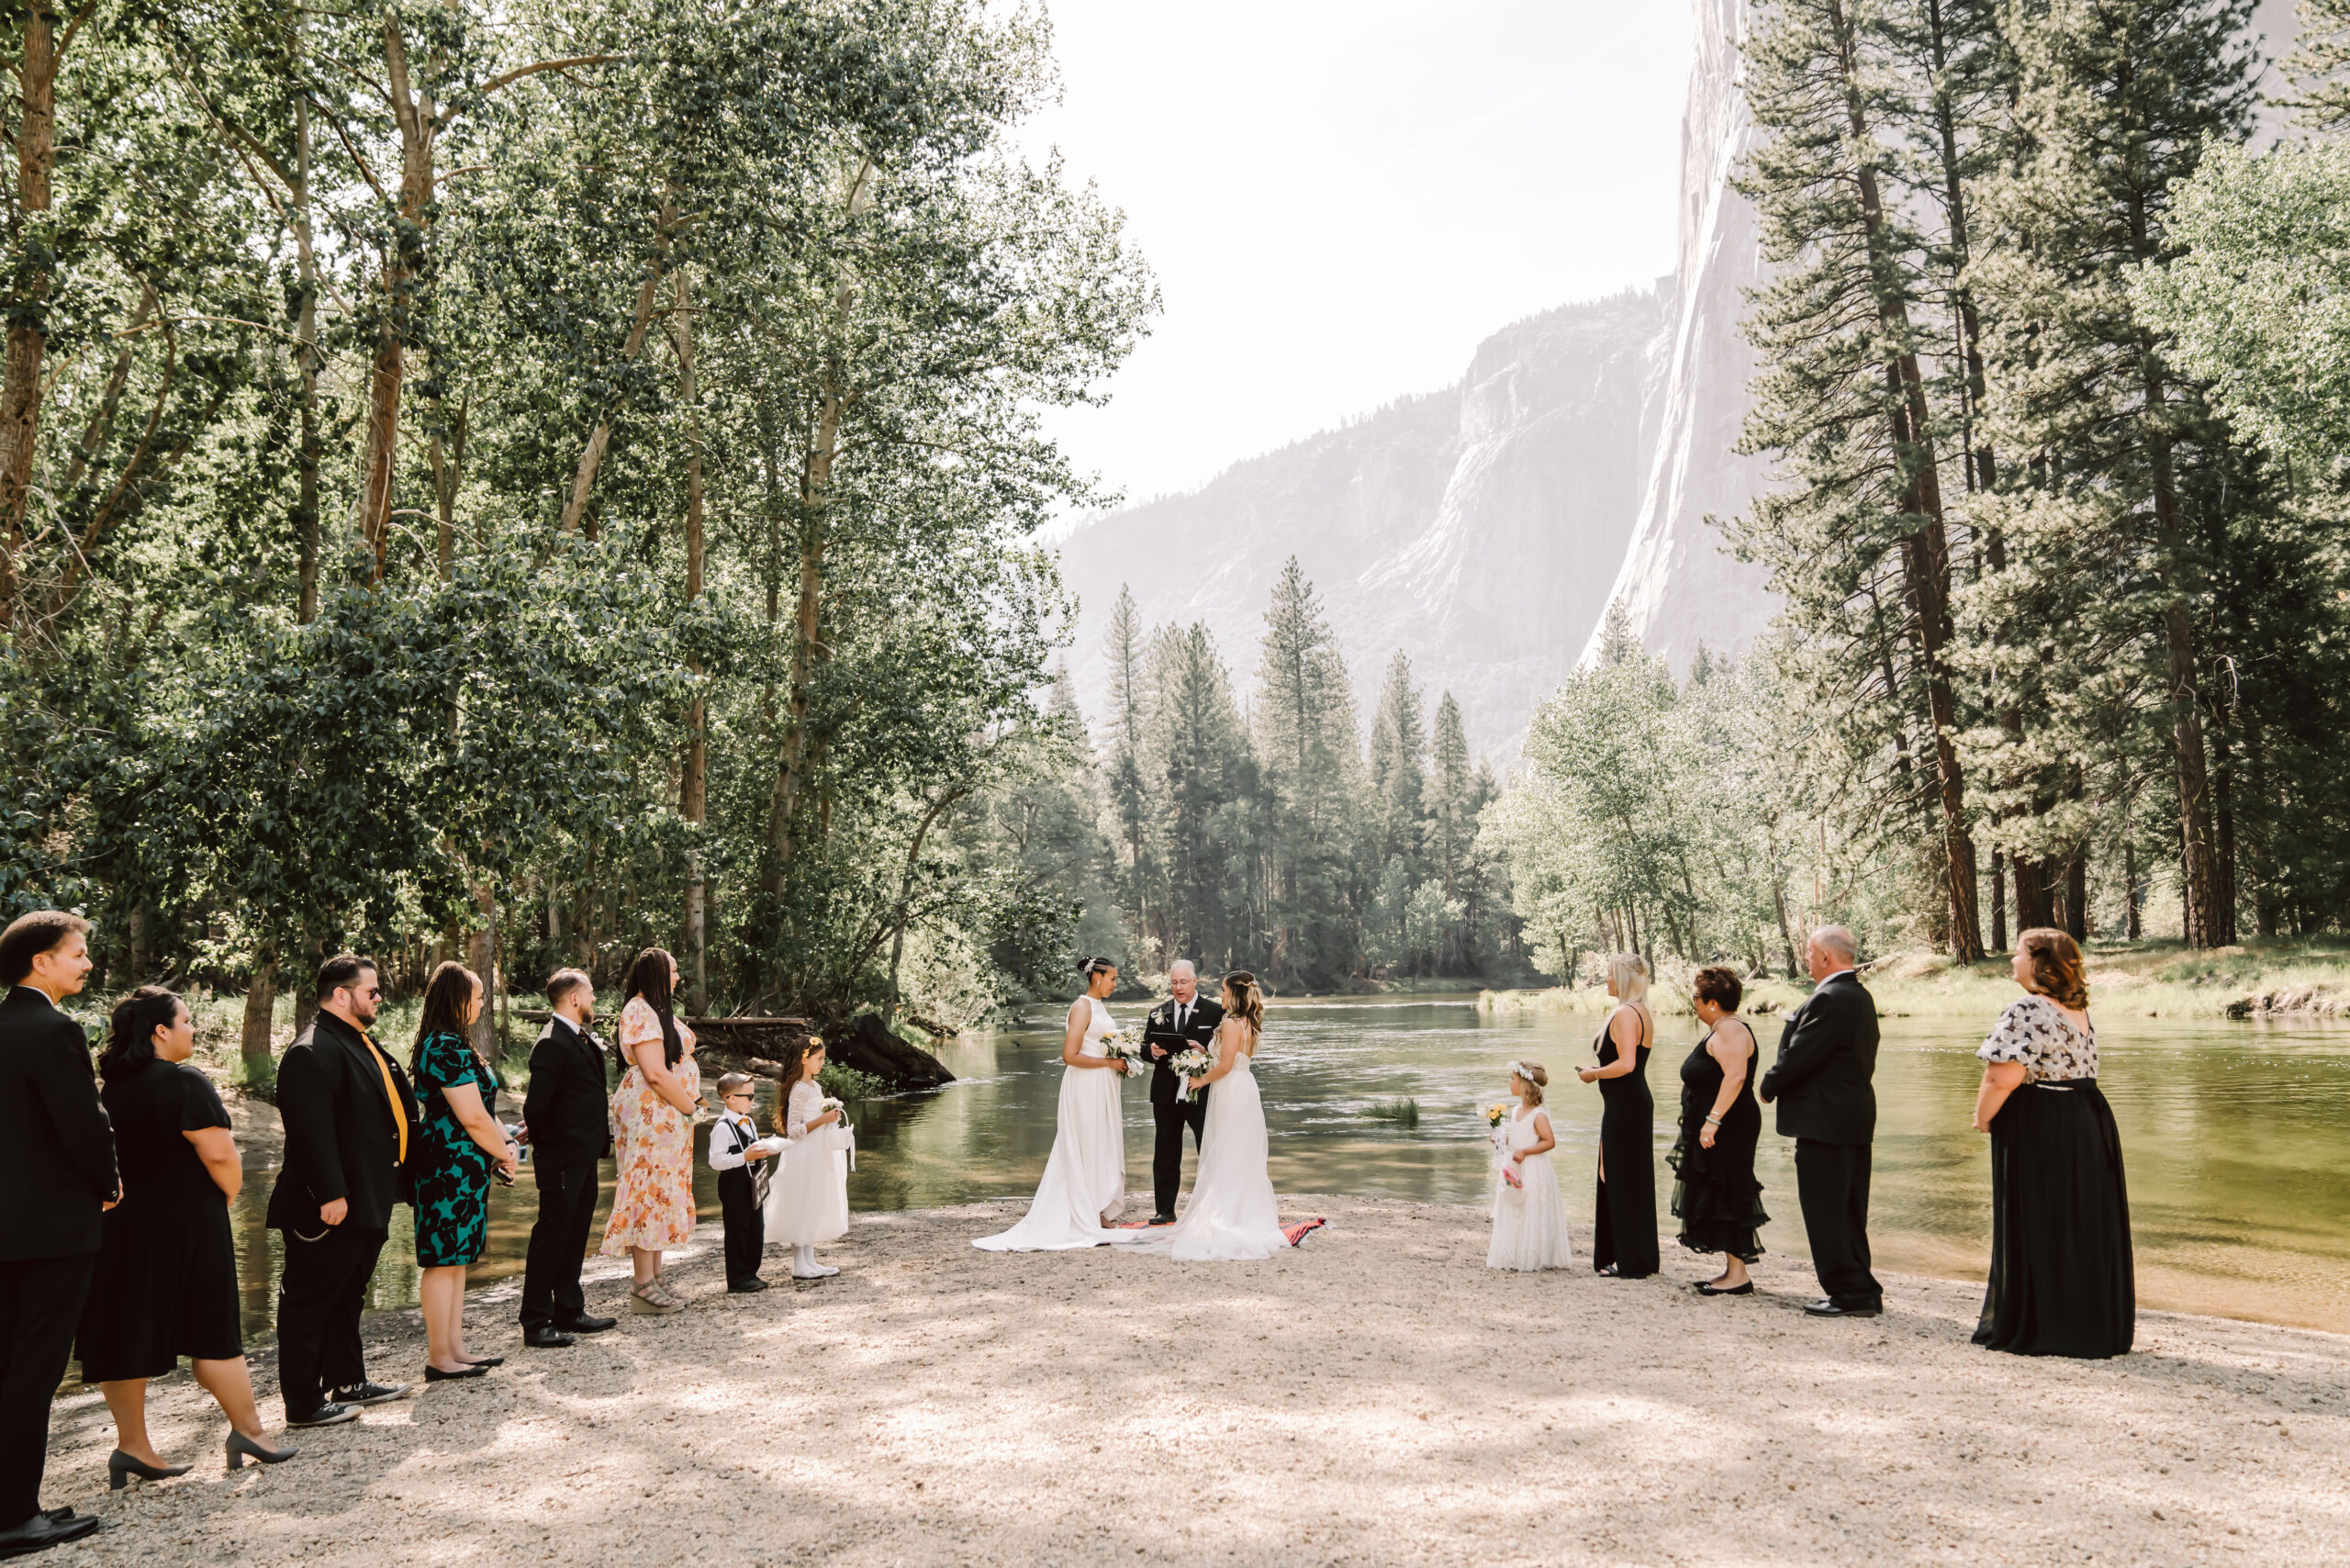 Two brides getting married in Yosemite at Cathedral Beach surrounded by friends and family